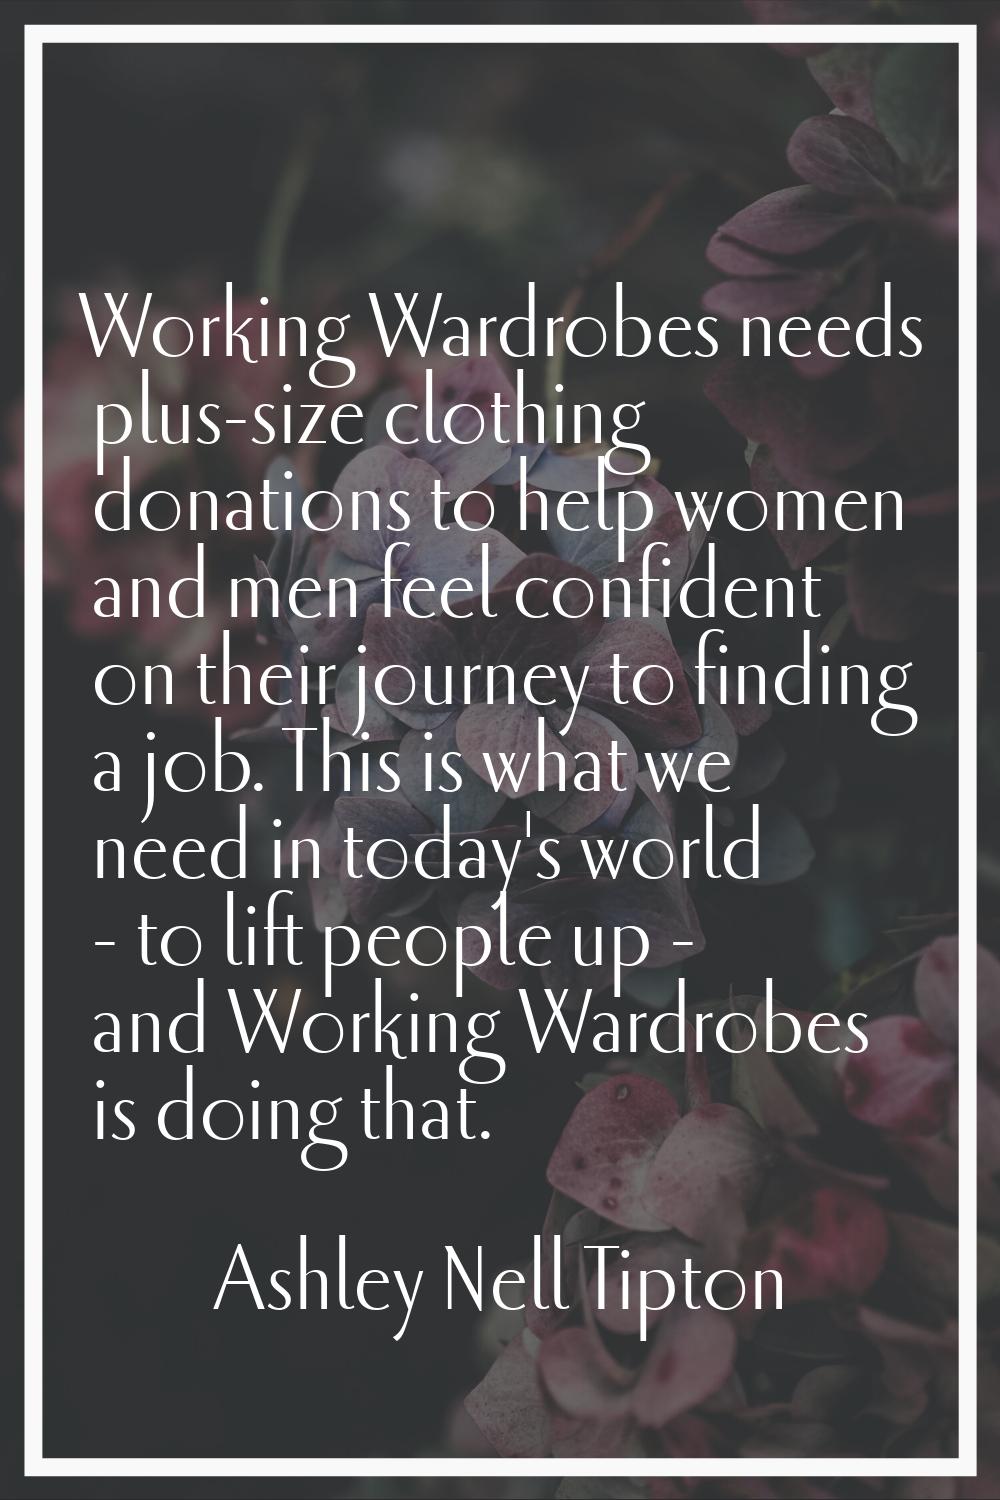 Working Wardrobes needs plus-size clothing donations to help women and men feel confident on their 